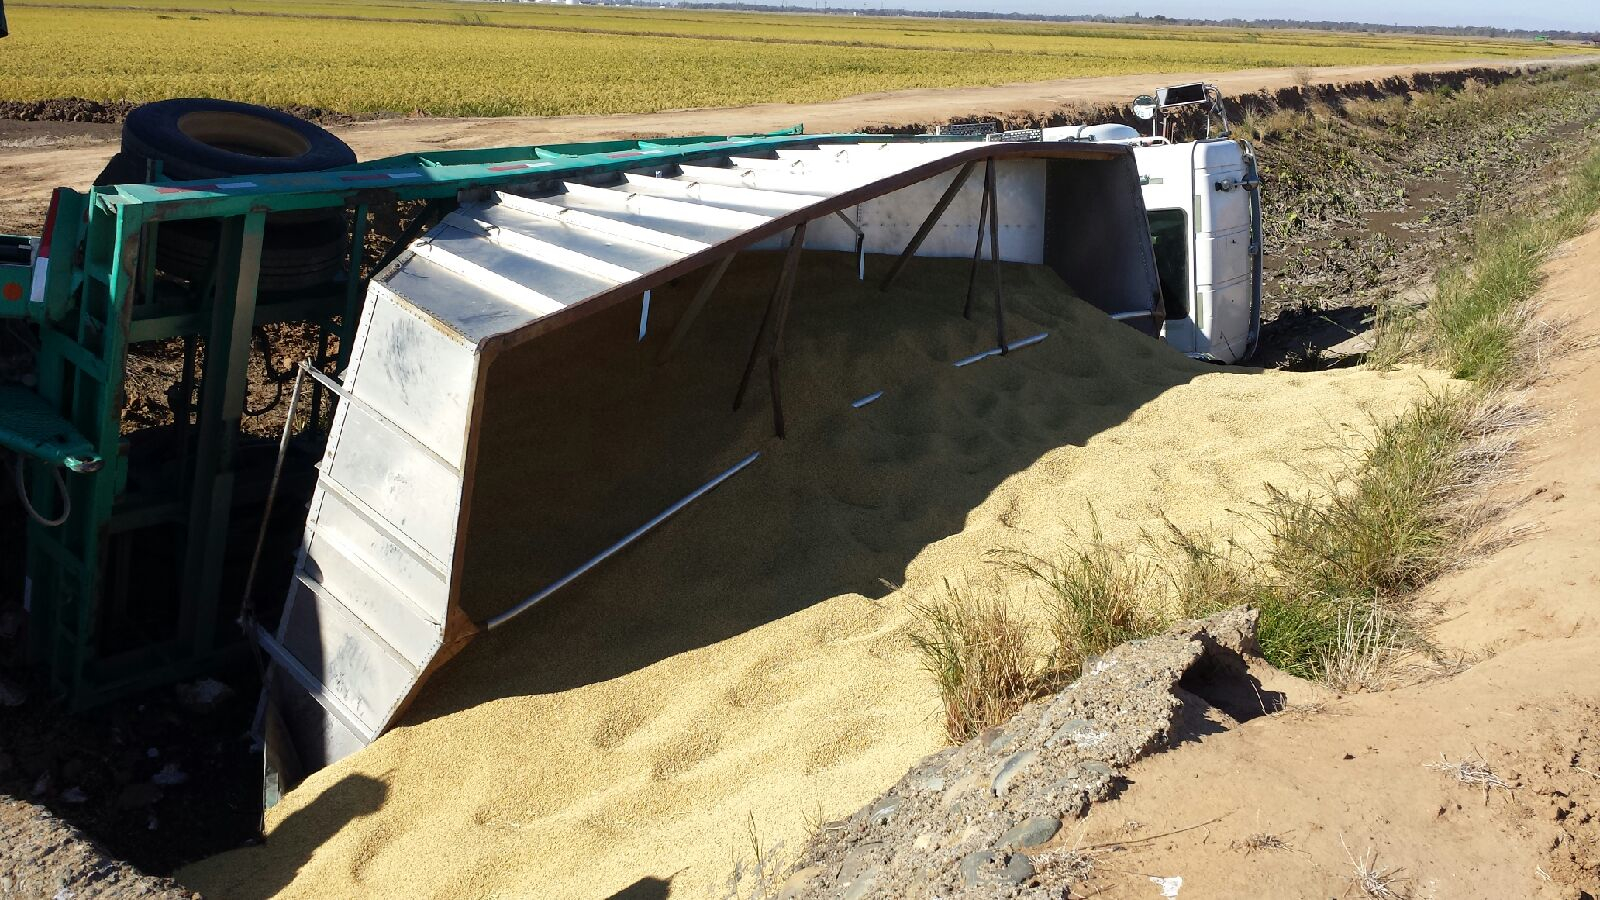 overturned tandem big rig along a dirt road and the rice that it was hauling spilled into the ditch